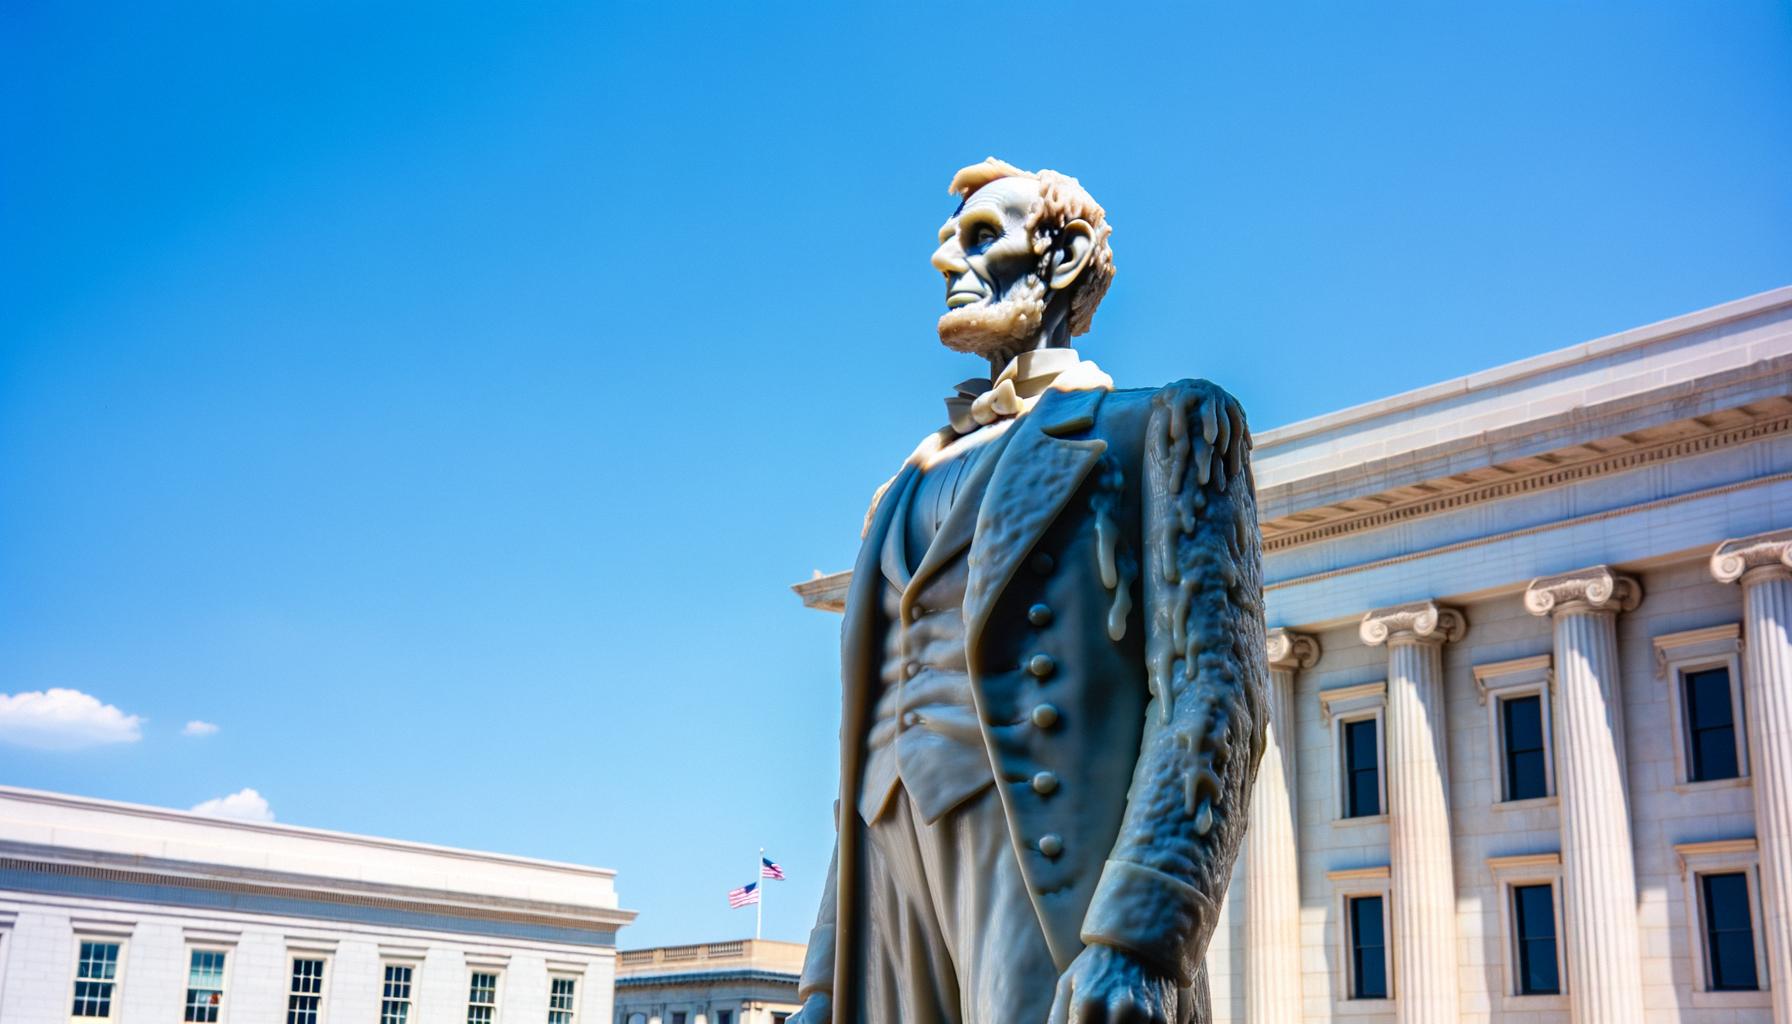 Washington DC's heatwave melted a six-foot wax Abraham Lincoln statue.